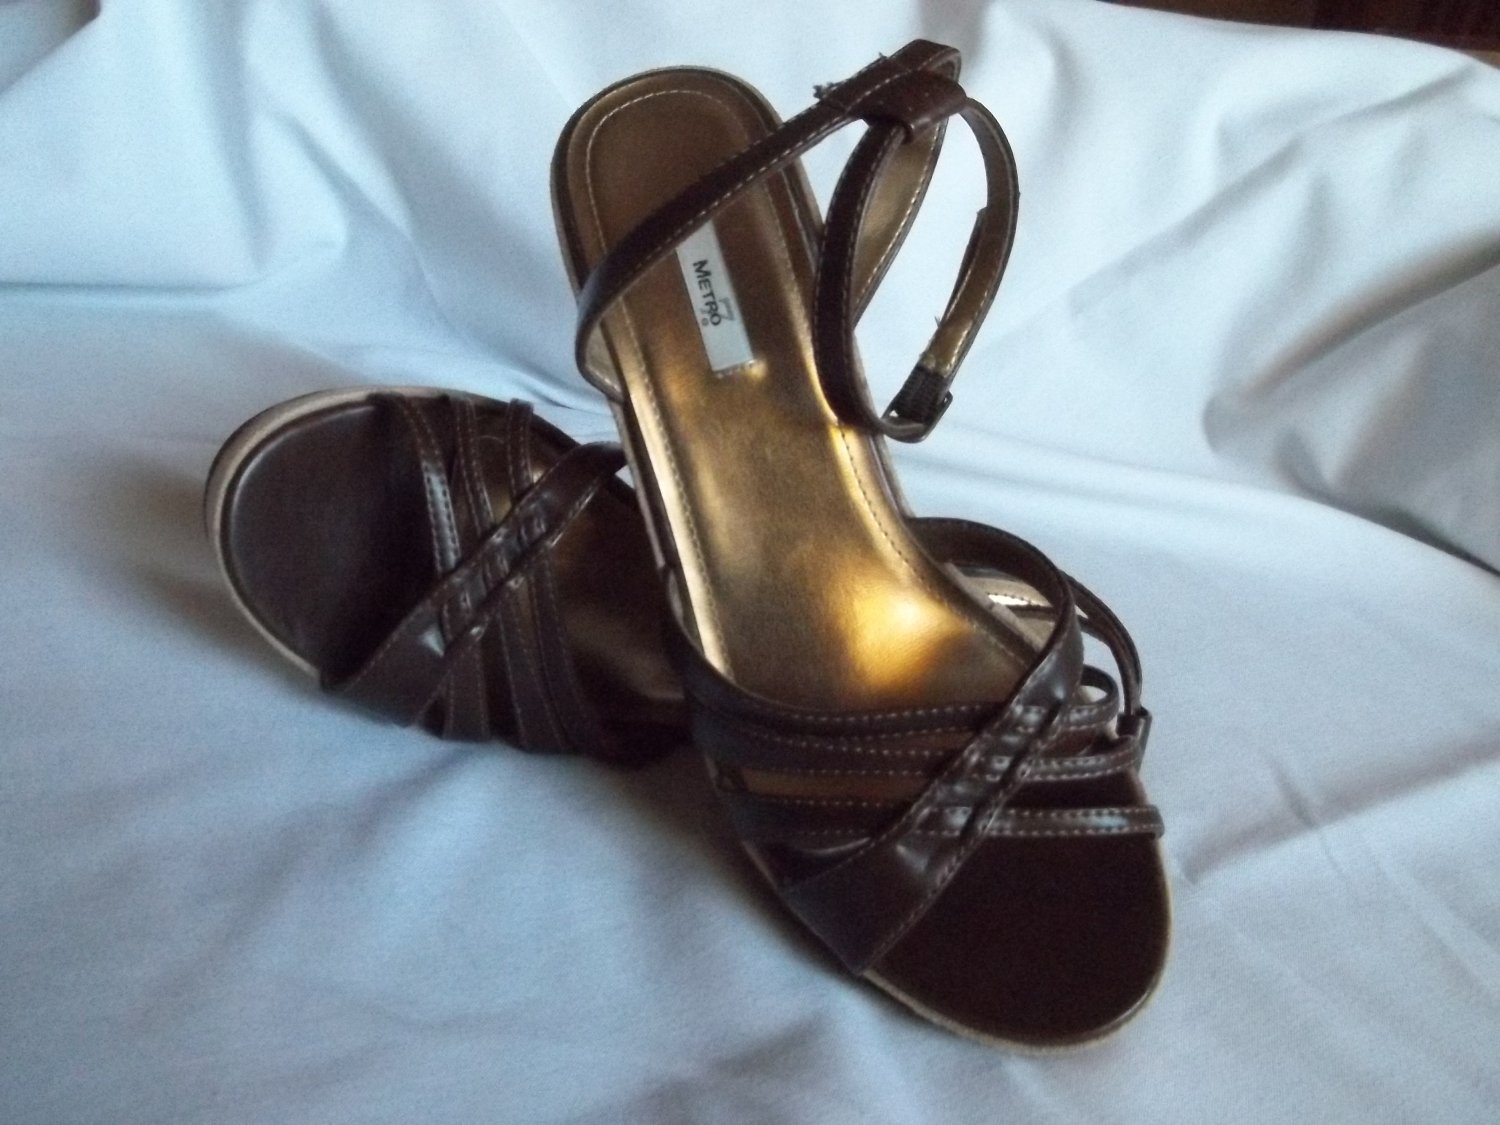 Brown-Bronze Wedge Sandals By Metro7 Size 8.5